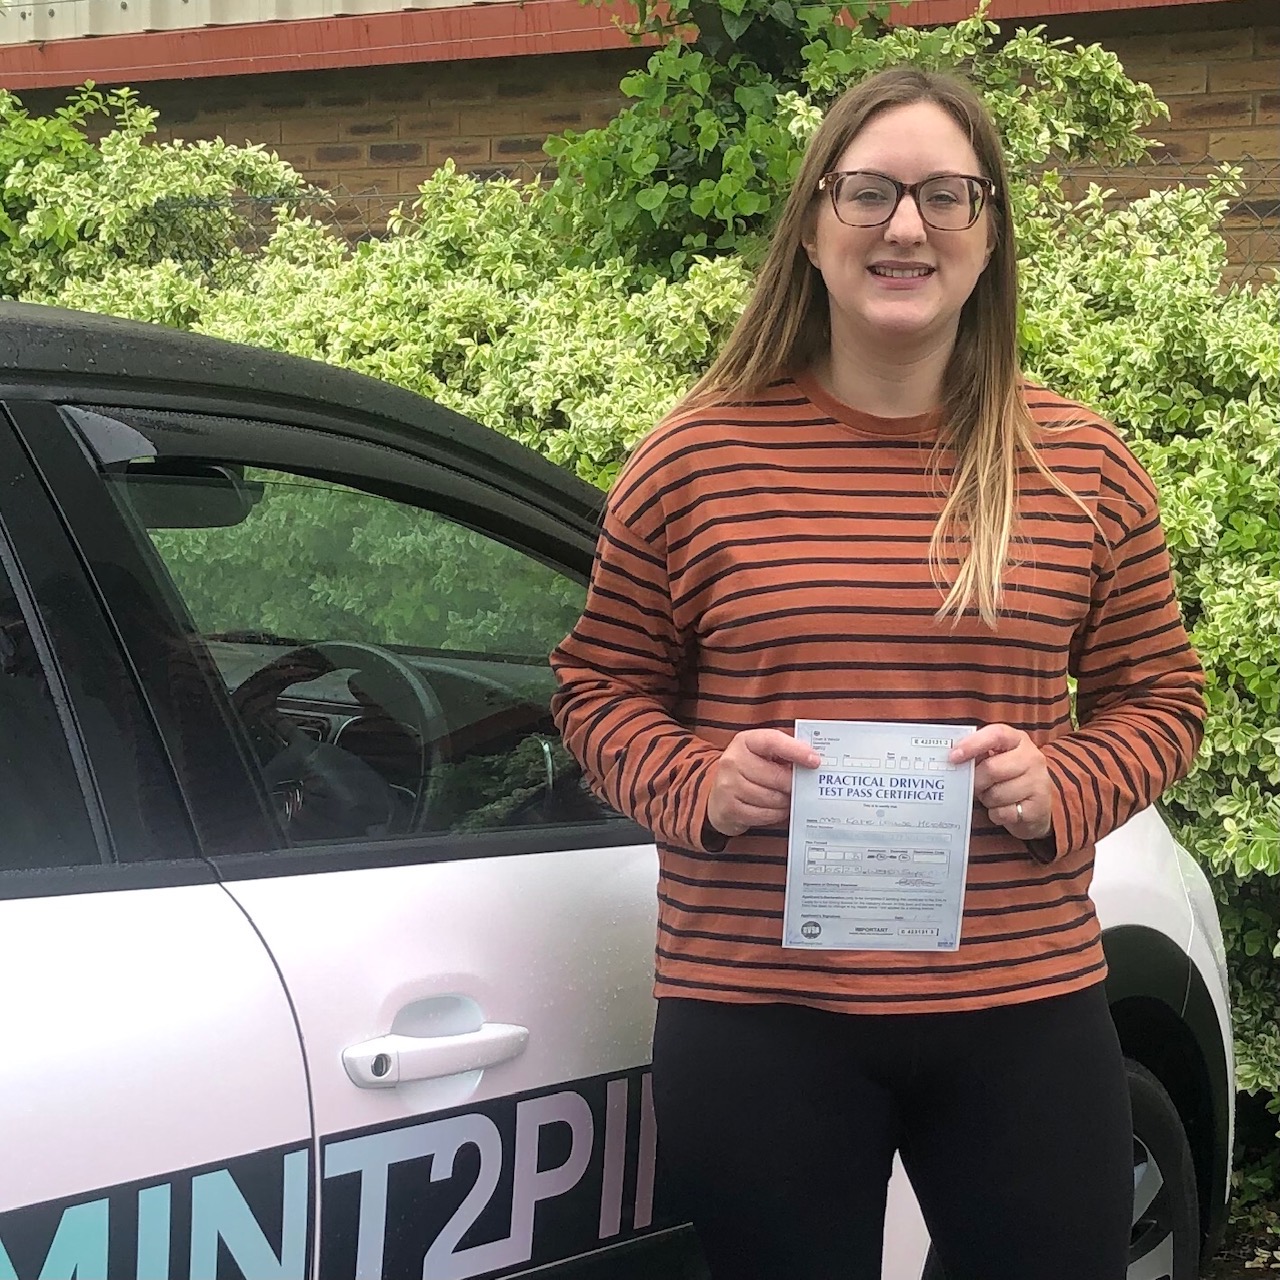 Katie - Only 3 minors!